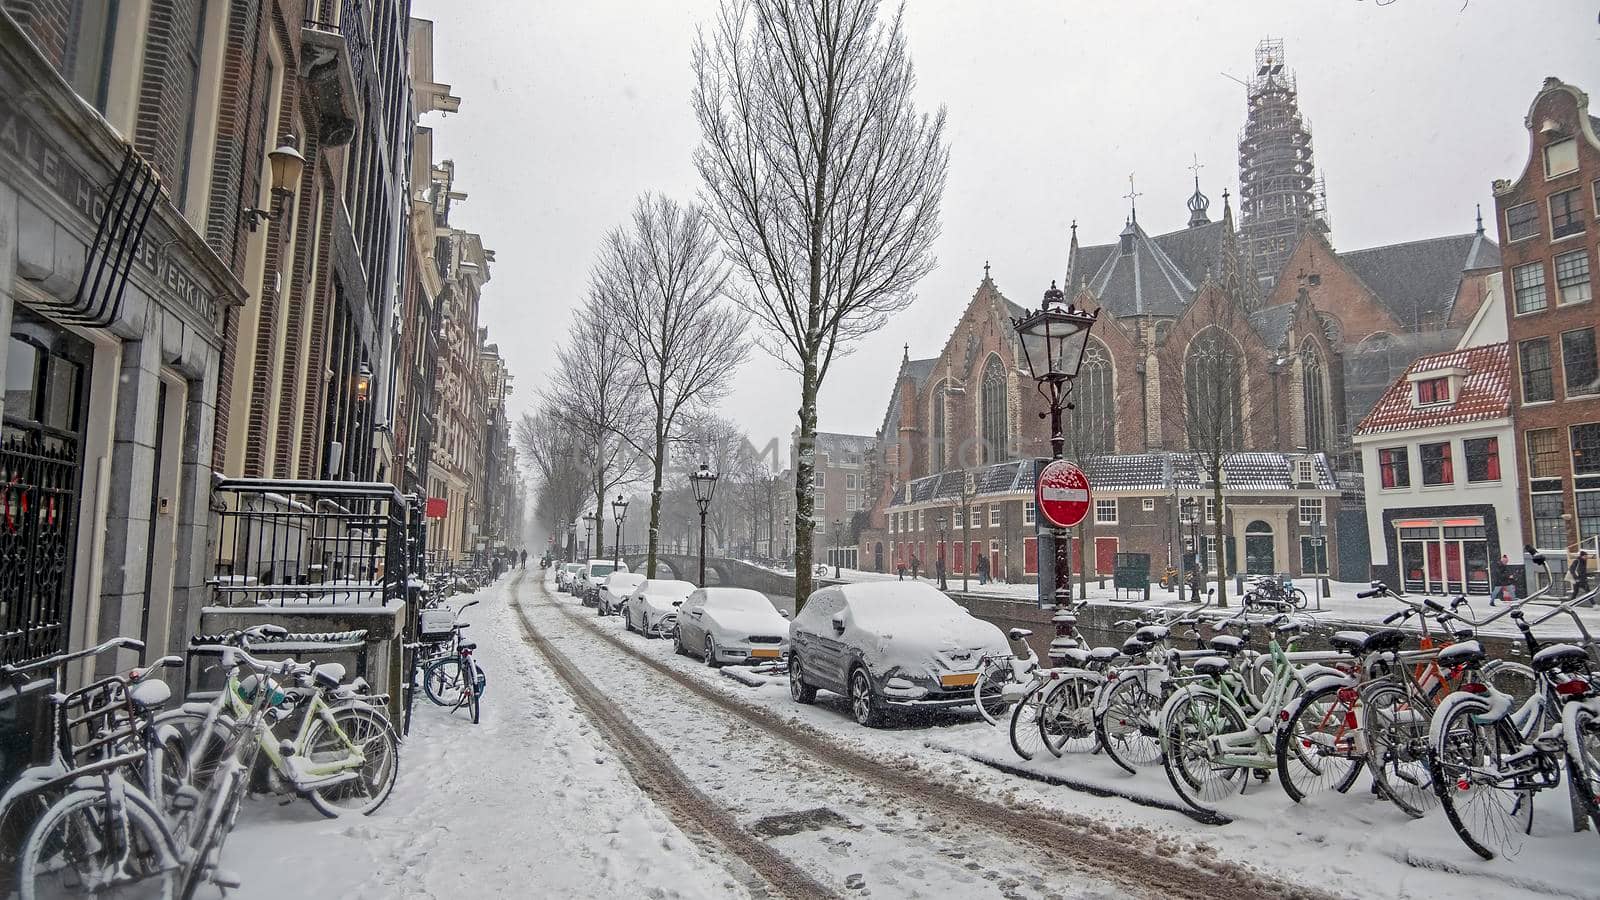 Snowy city Amsterdam in the Netherlands in winter by devy